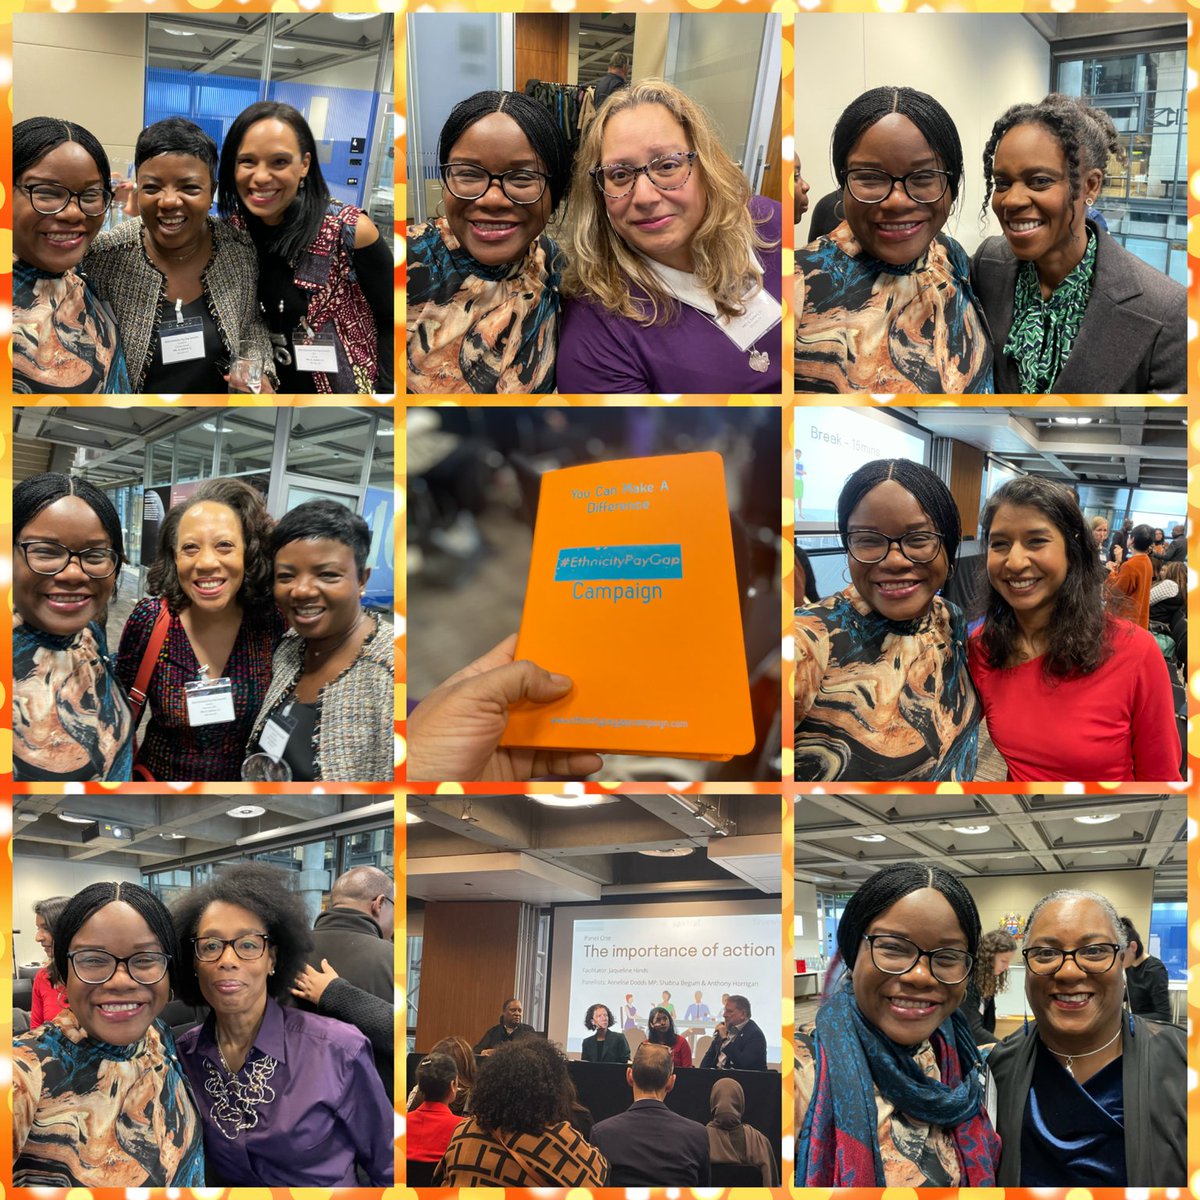 From launching the #EthnicityPayGap® campaign in 2018 to advocating for mandatory reporting, Dianne Greyson convened us for an Ethnicity Pay Gap summit - A HISTORICAL INSIGHTFUL DAY  #ListenChangeAct #MandateEthnicityPayGap